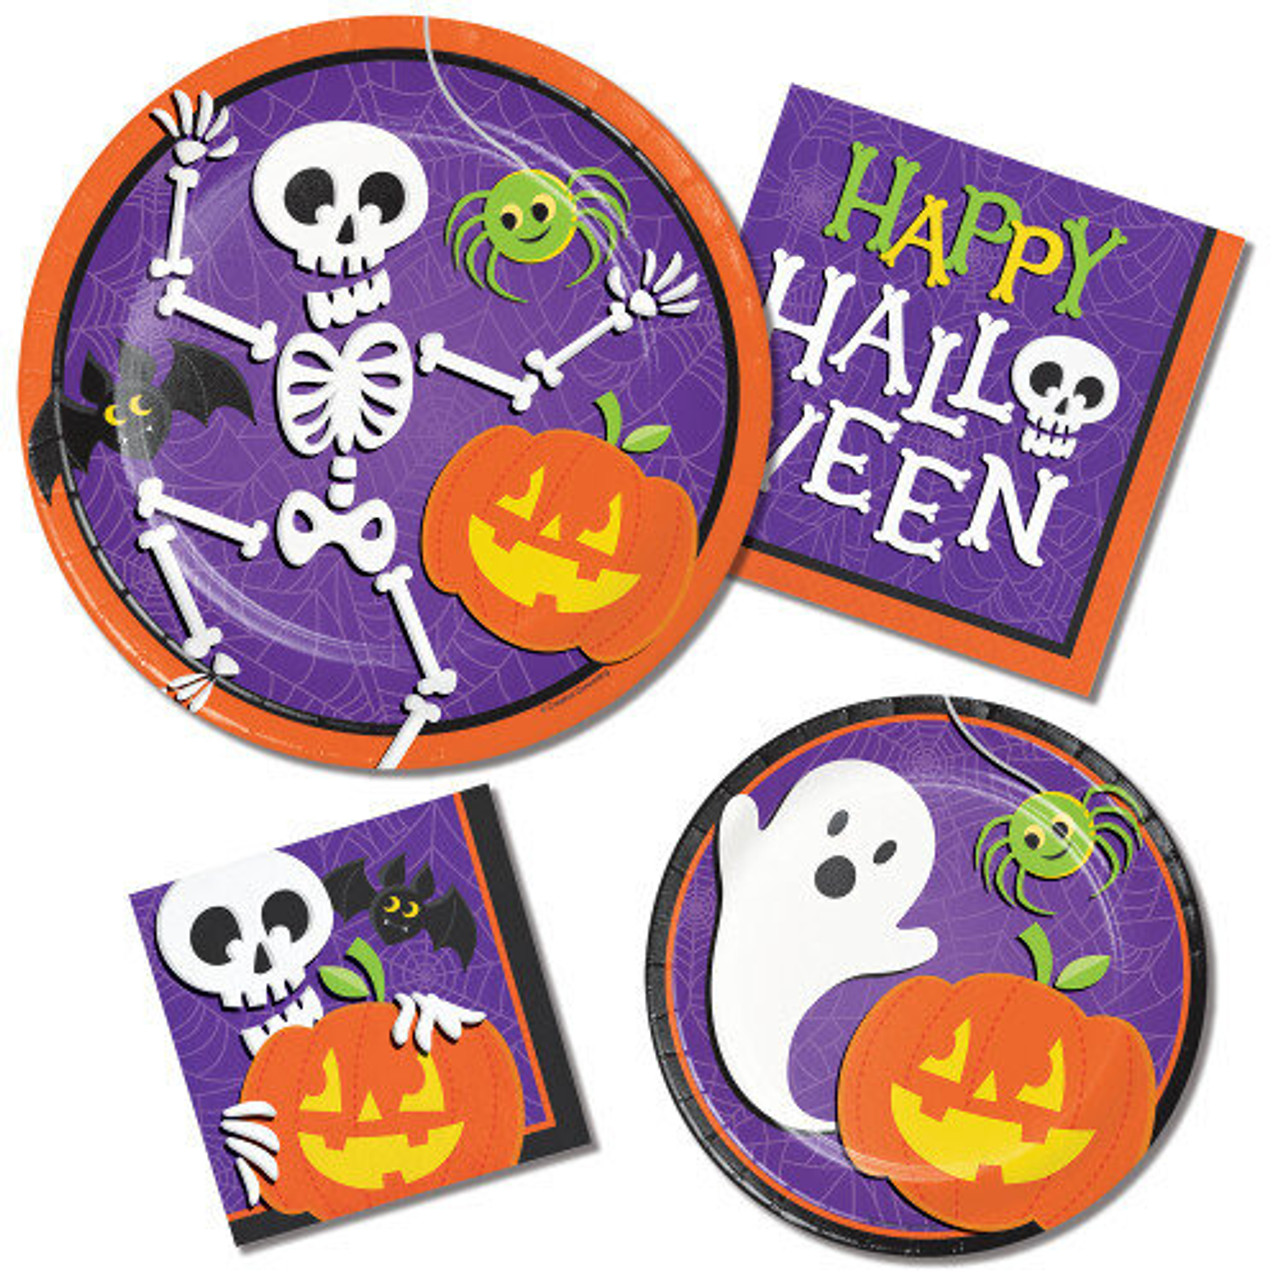 https://cdn11.bigcommerce.com/s-hgqmwywp99/images/stencil/1280x1280/products/50398/45184/halloween-skeleton-6-75-paper-plates-8-count-1__26243.1675880388.jpg?c=1?imbypass=on